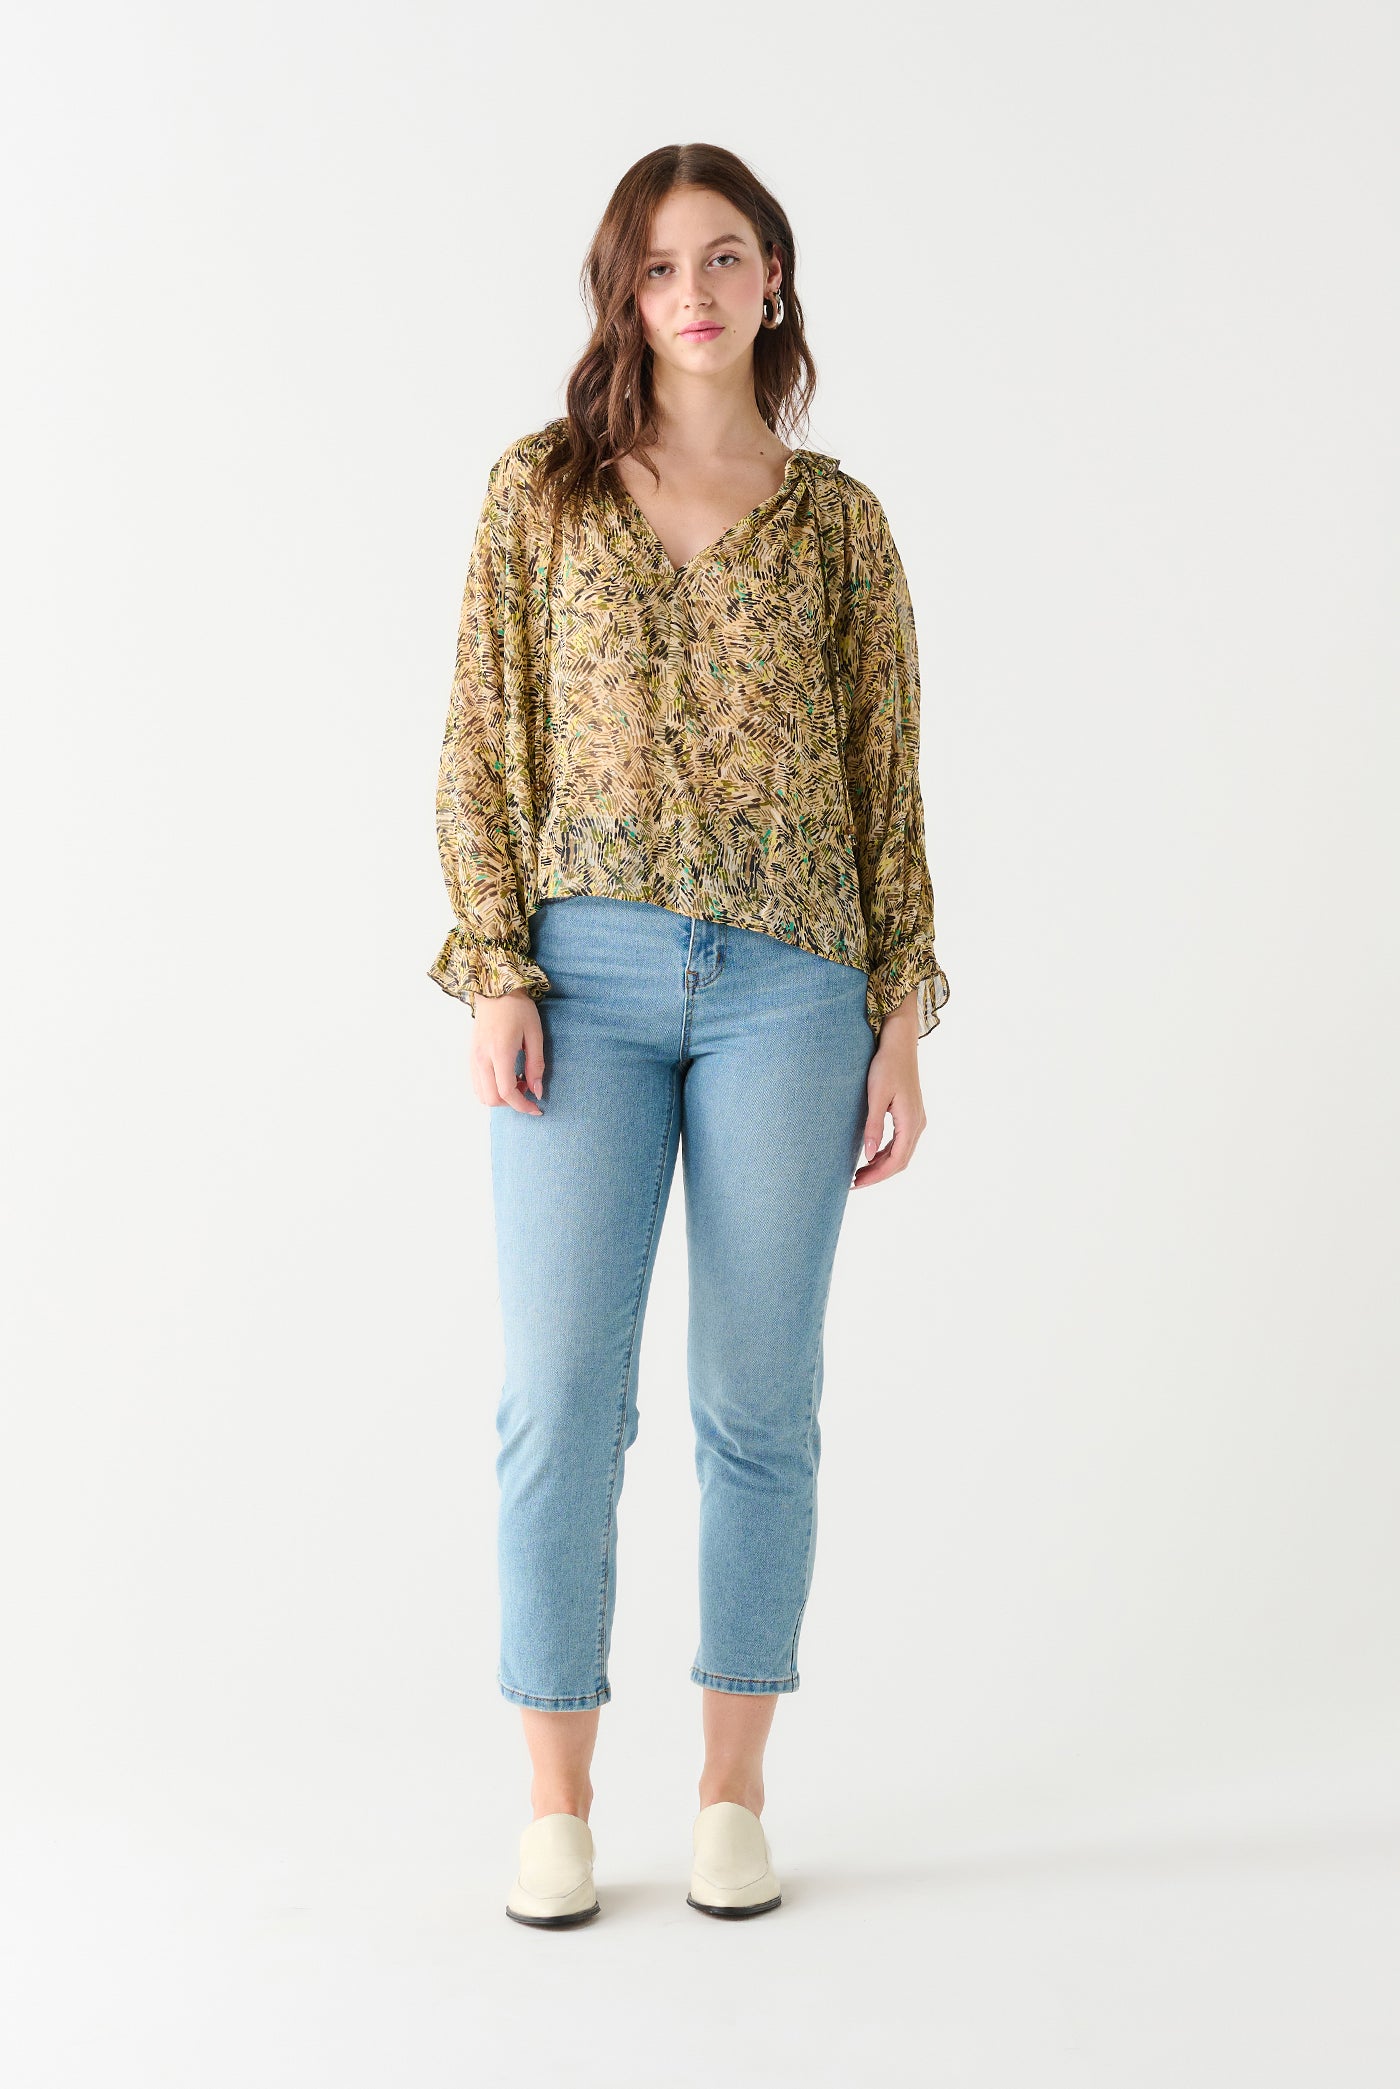 Ruffled Printed Blouse-Long Sleeves-Vixen Collection, Day Spa and Women's Boutique Located in Seattle, Washington